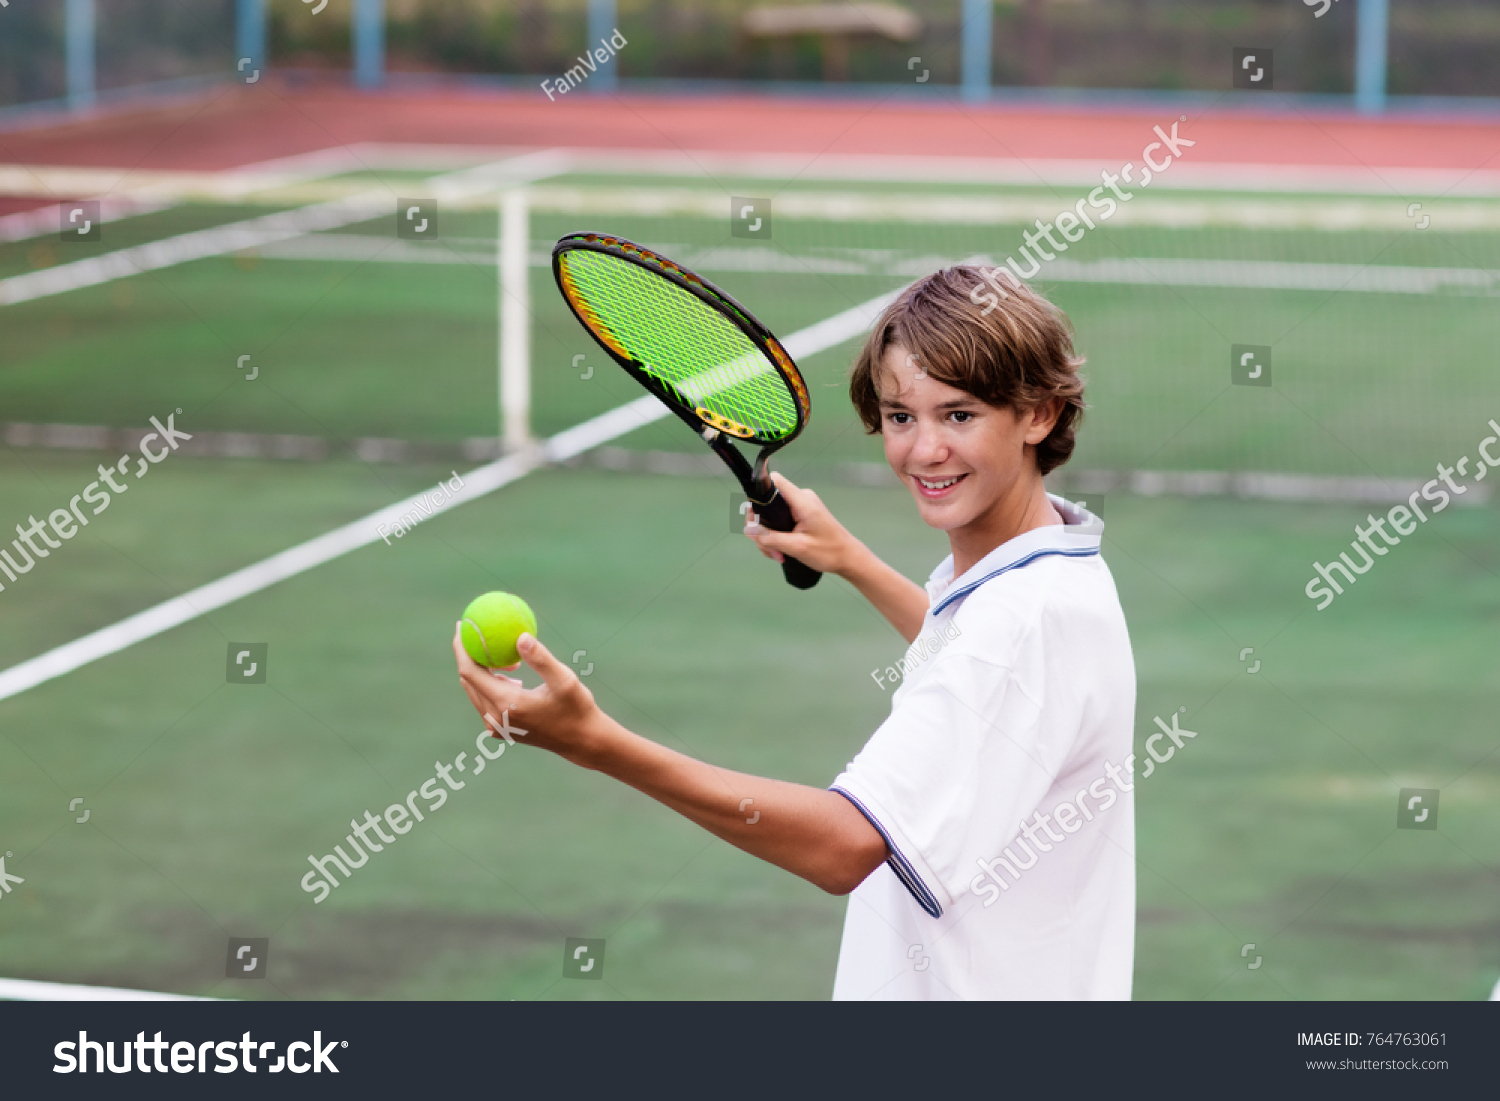 Boy playing tennis on outdoor court. Teenager with tennis racket and ball in sport club. Active exercise for kids. Summer activities for children. Training for young kid. Child learning to play. #764763061